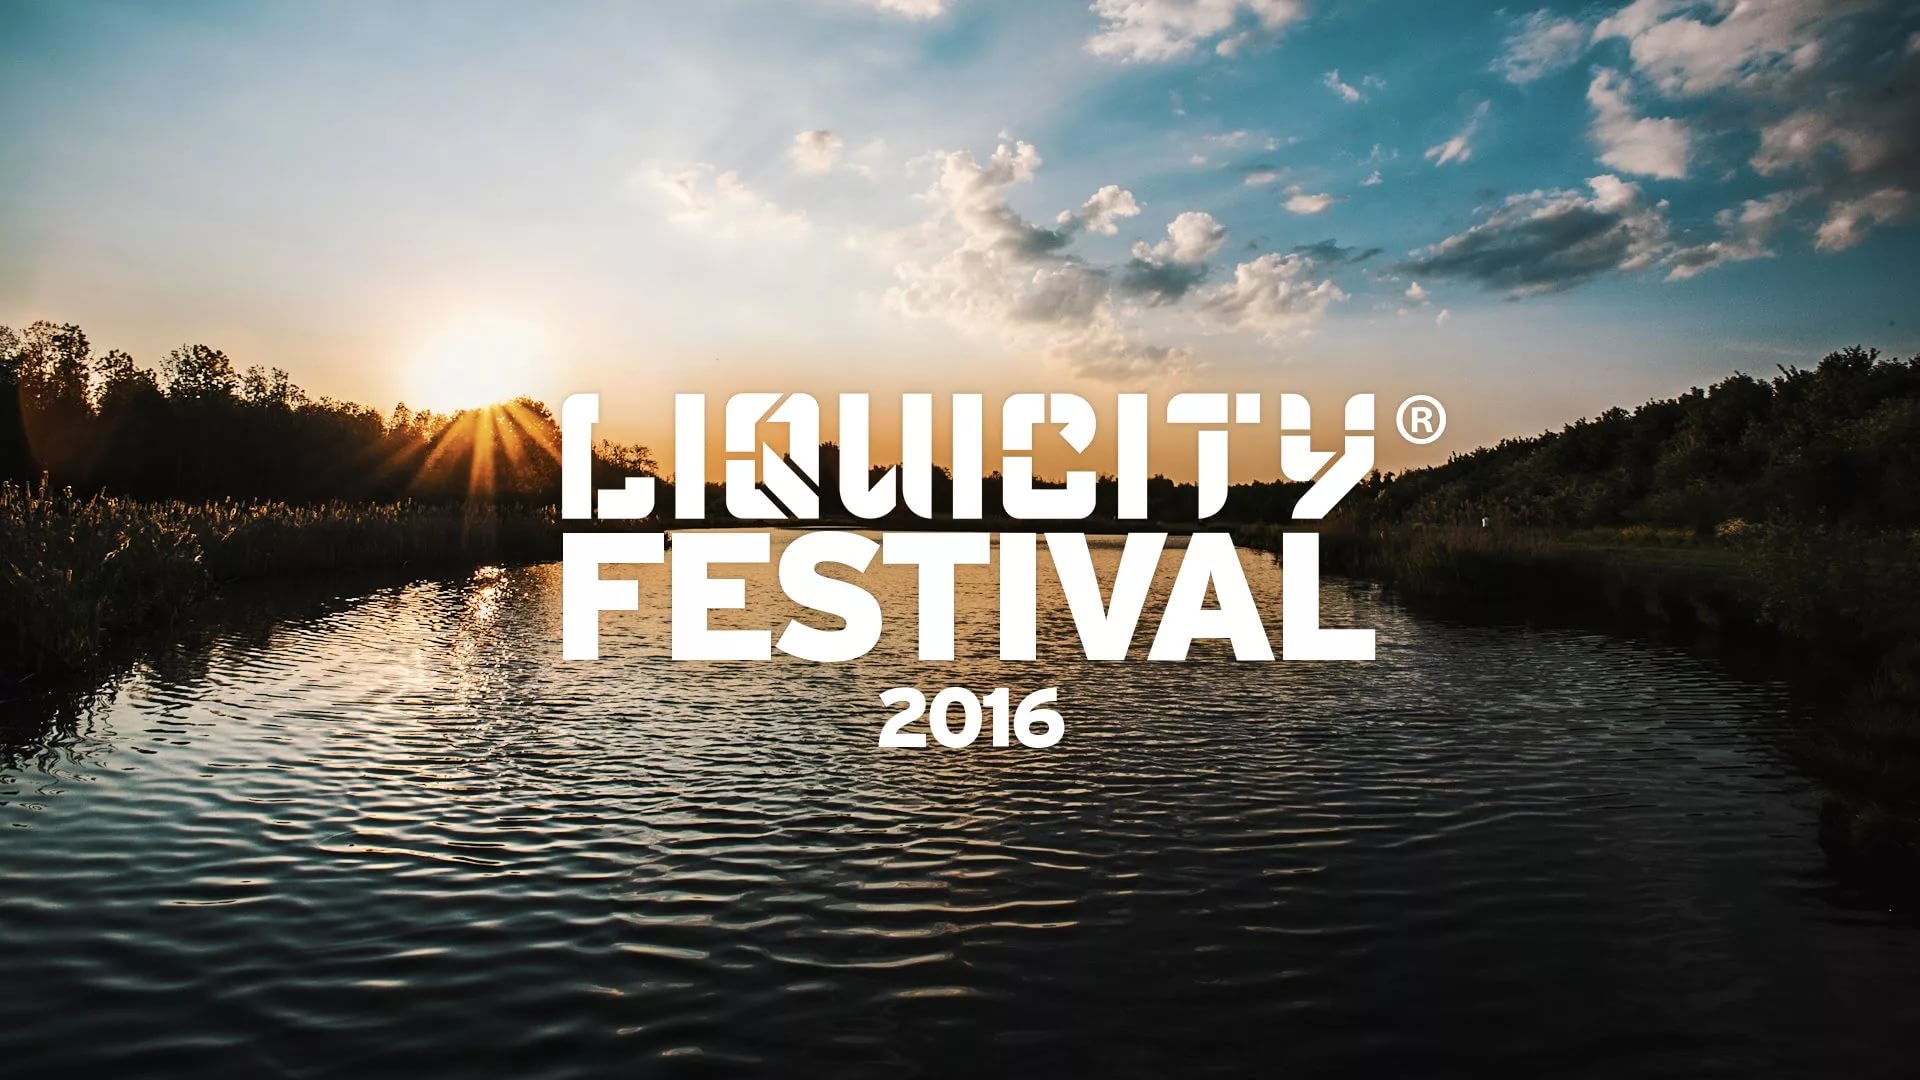 Best Images Of Liquicity Images Of Liquicity - Reflection , HD Wallpaper & Backgrounds